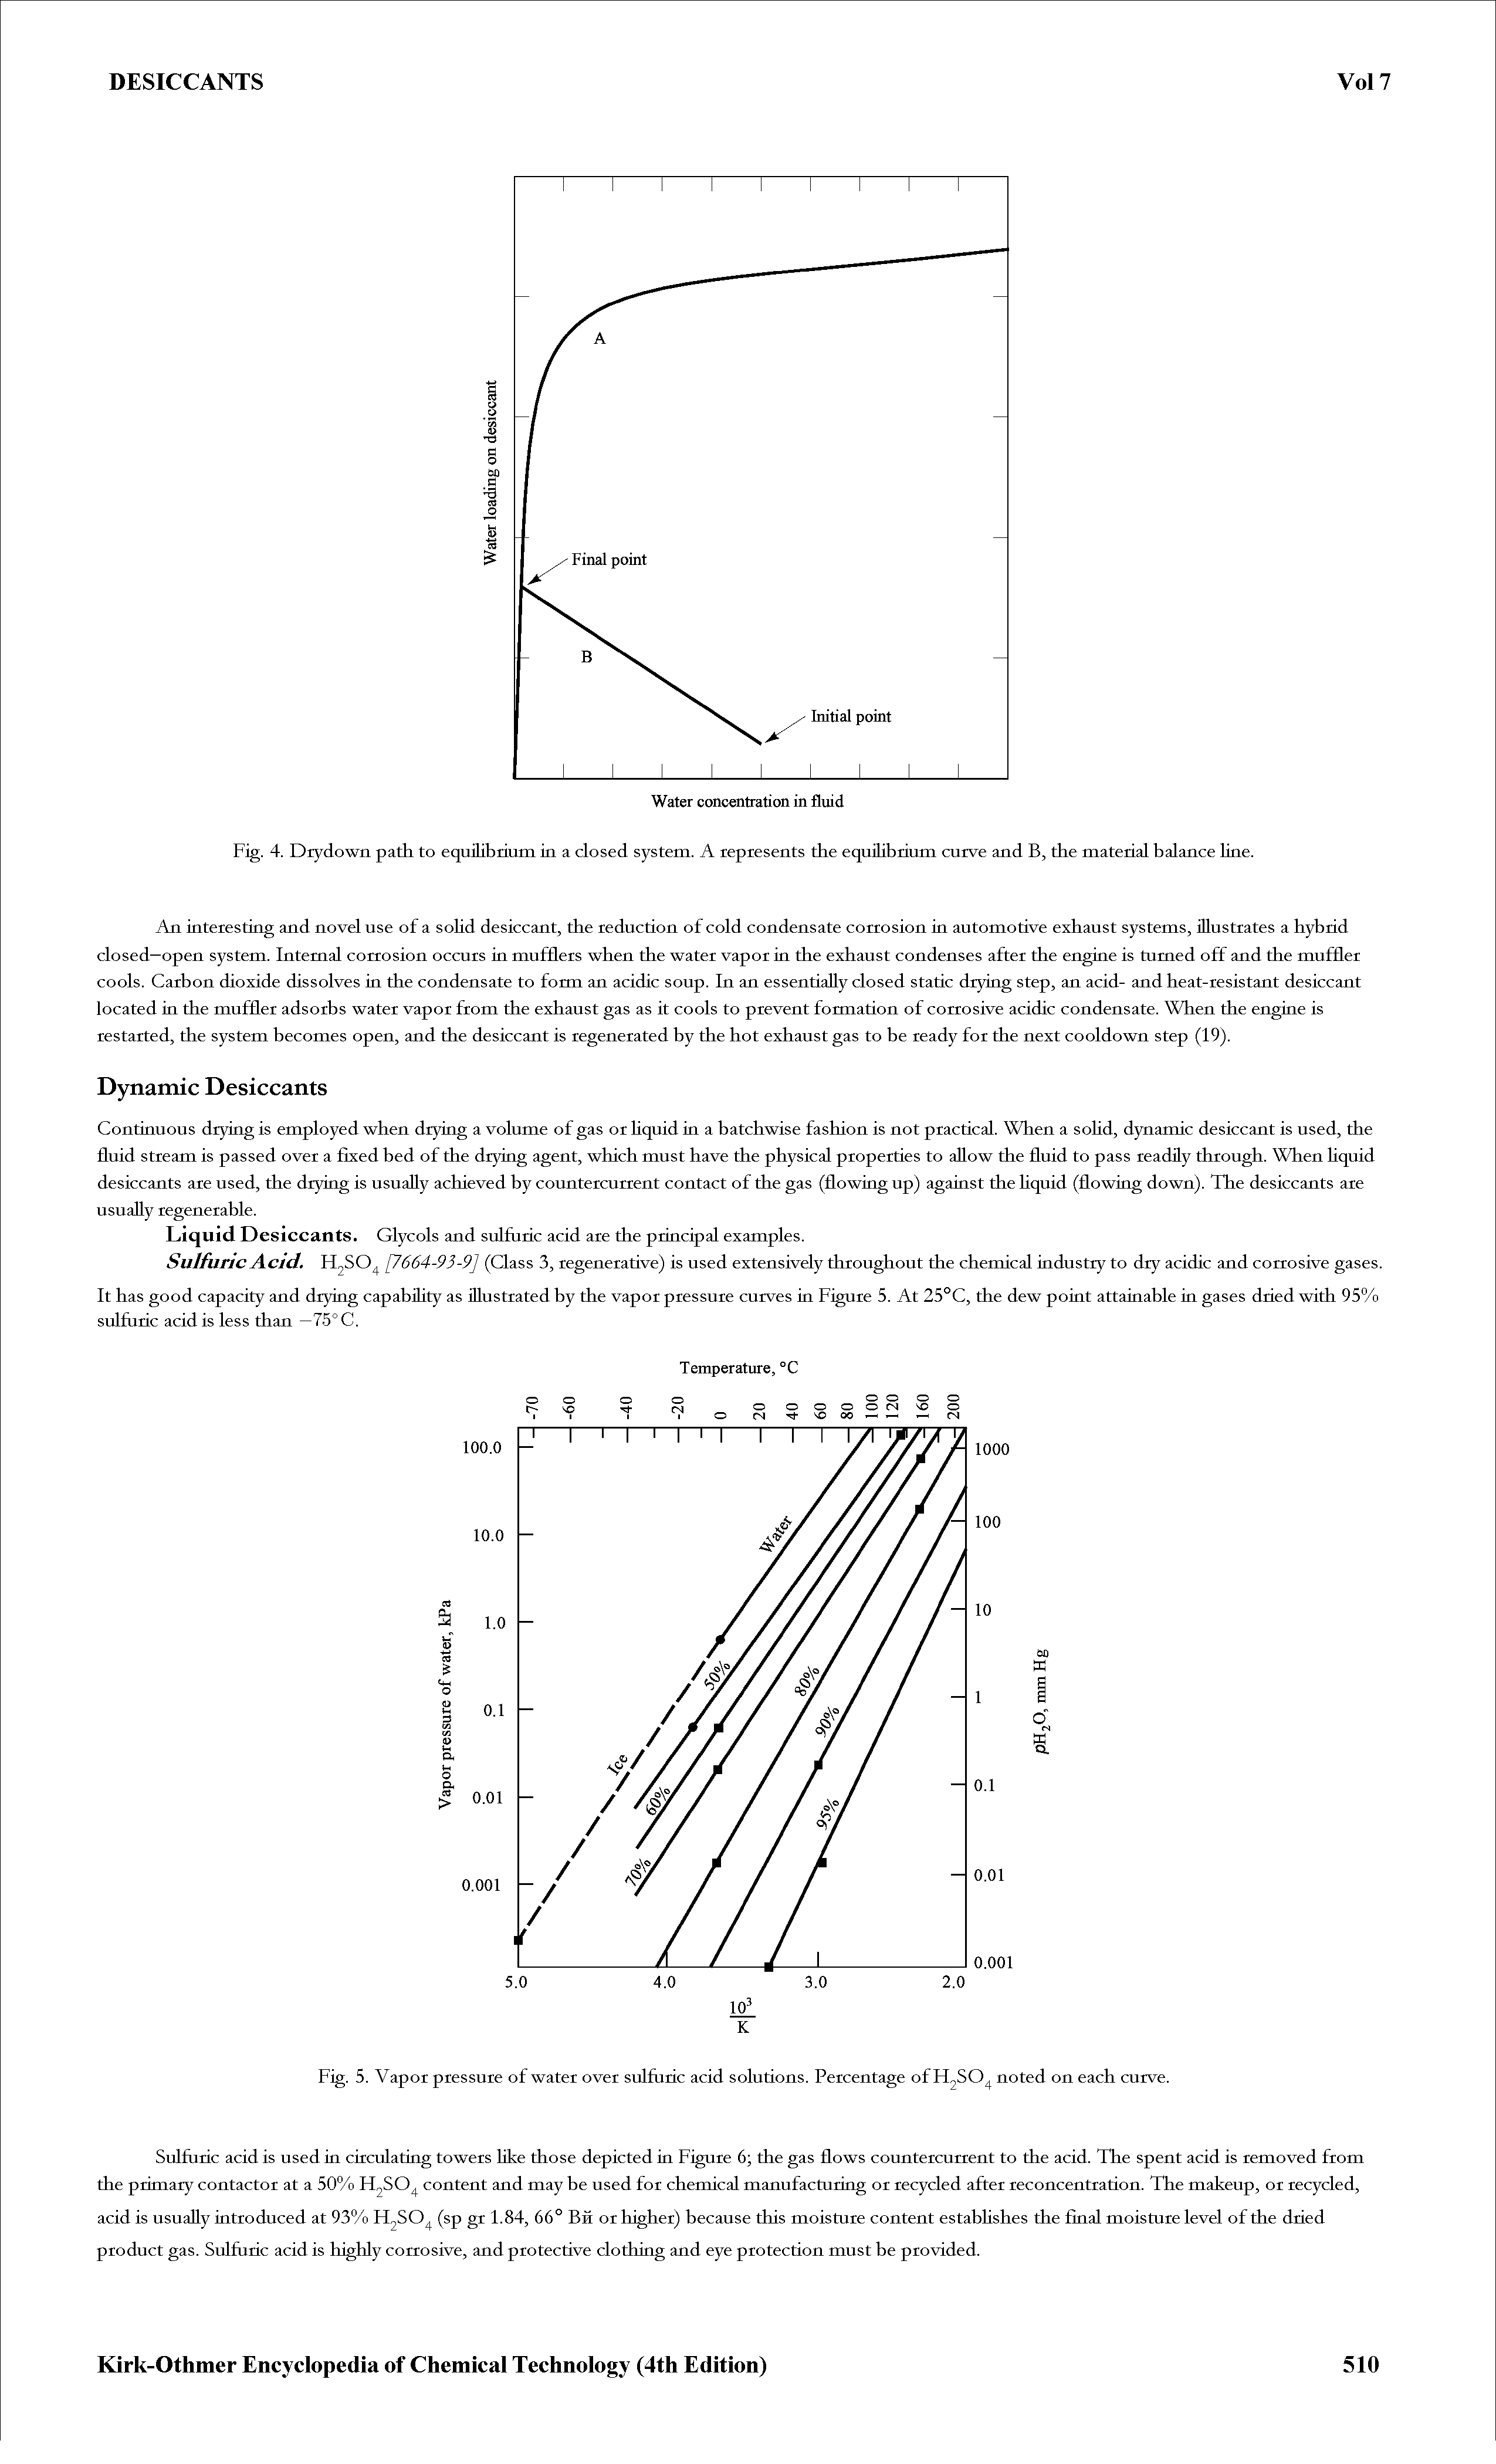 Fig. 4. Drydown path to equilibrium ia a closed system. A represents the equiUbrium curve and B, the material balance line.